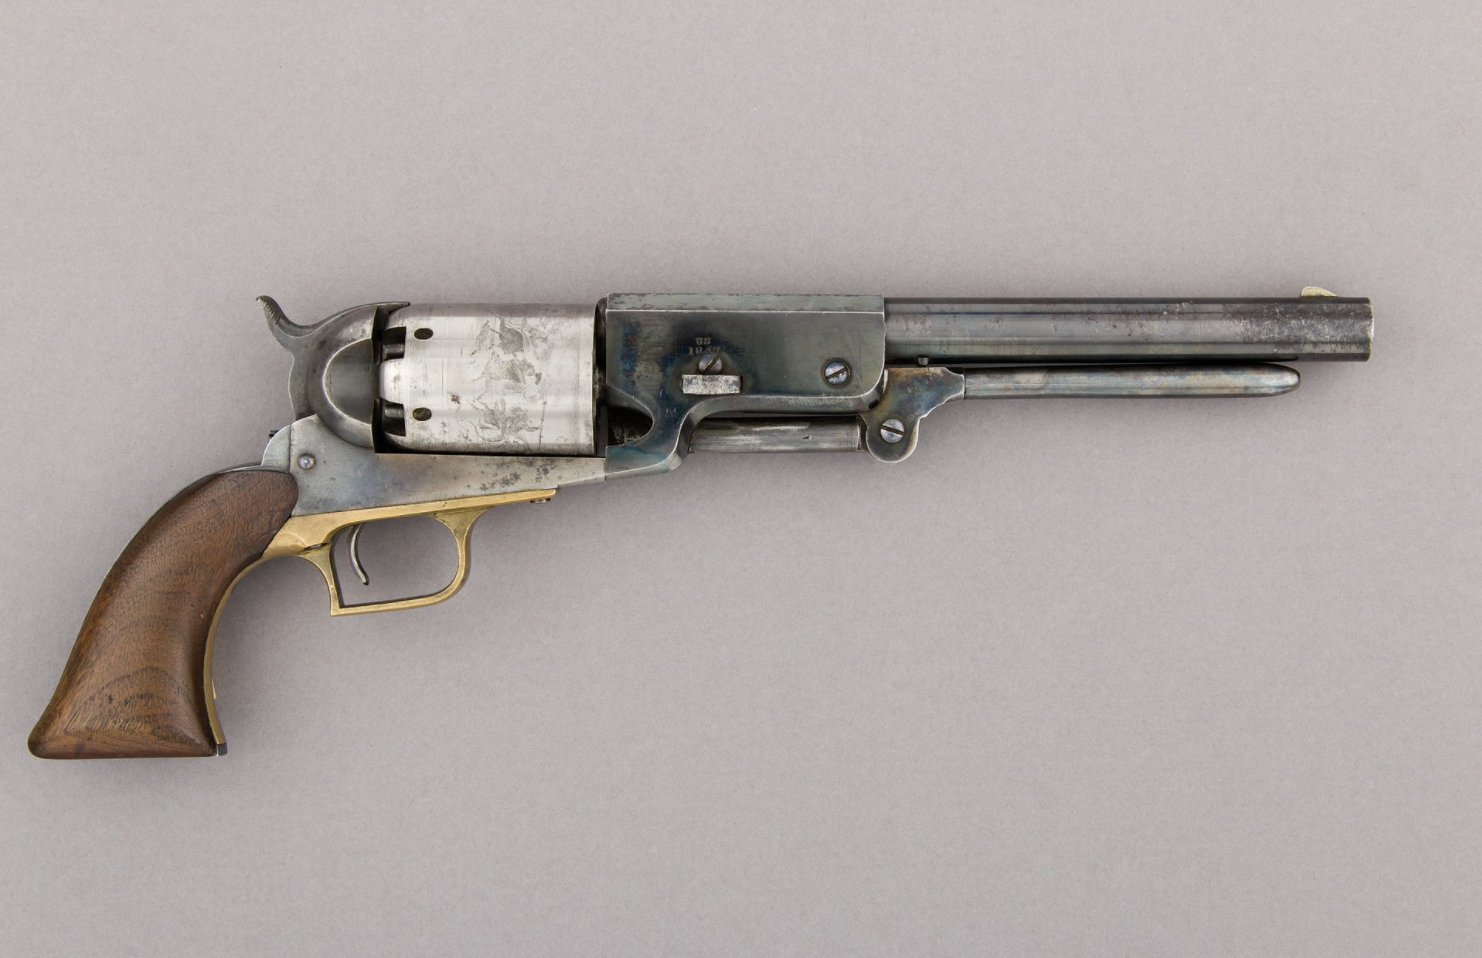 As far as military guns go, there were many issues associated with the Colt Walker.